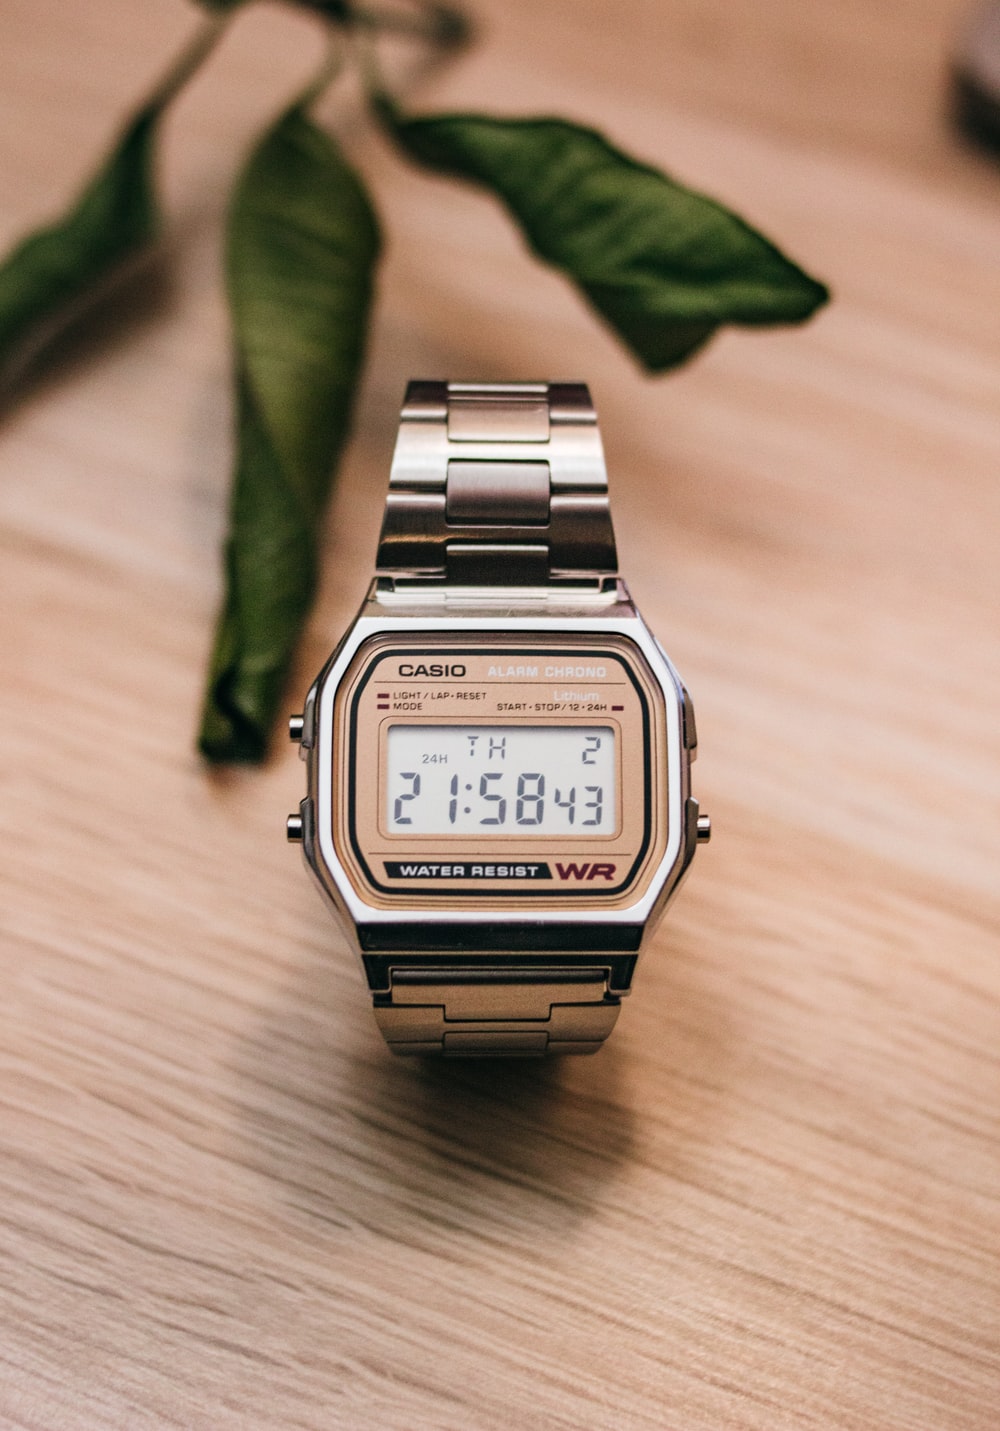 Casio Wallpapers